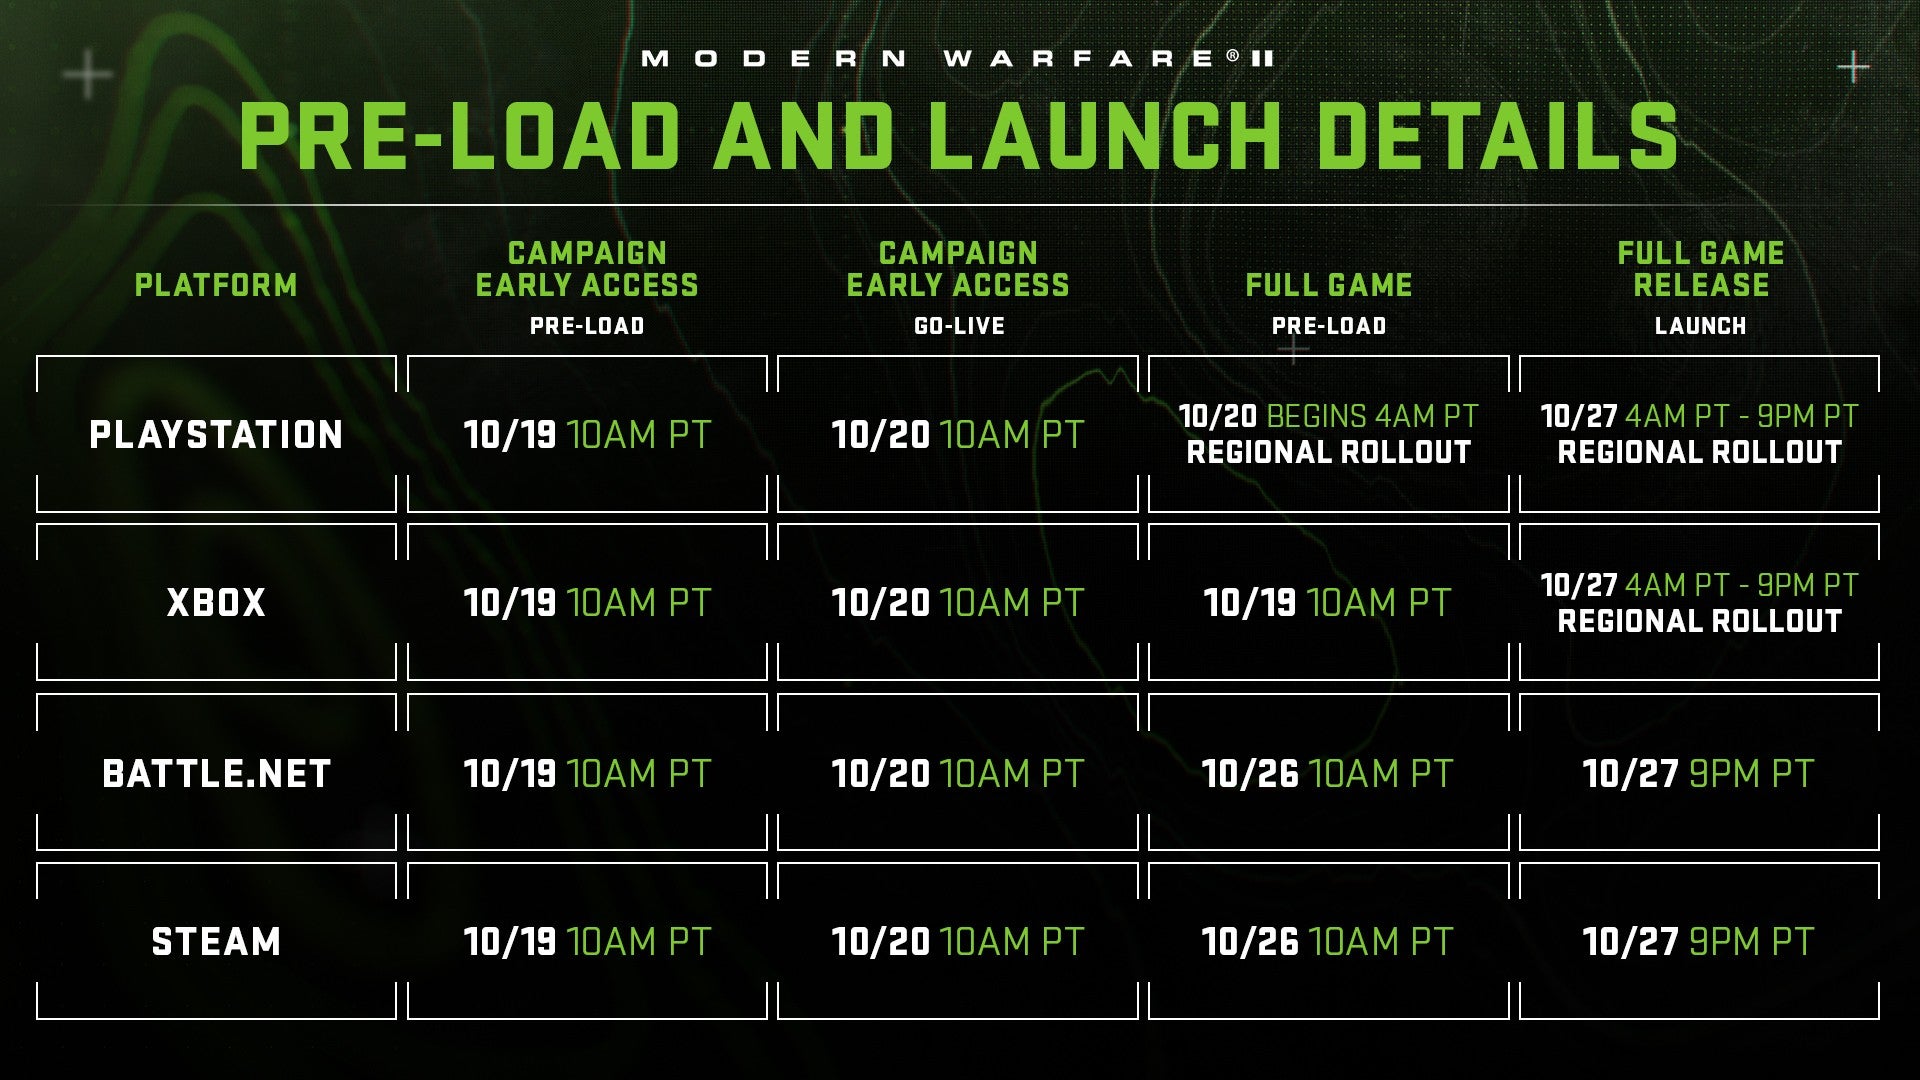 Screenshot showing preload and launch times for Modern Warfare 2 in a table, with platforms on the left and each launch stage along the top.